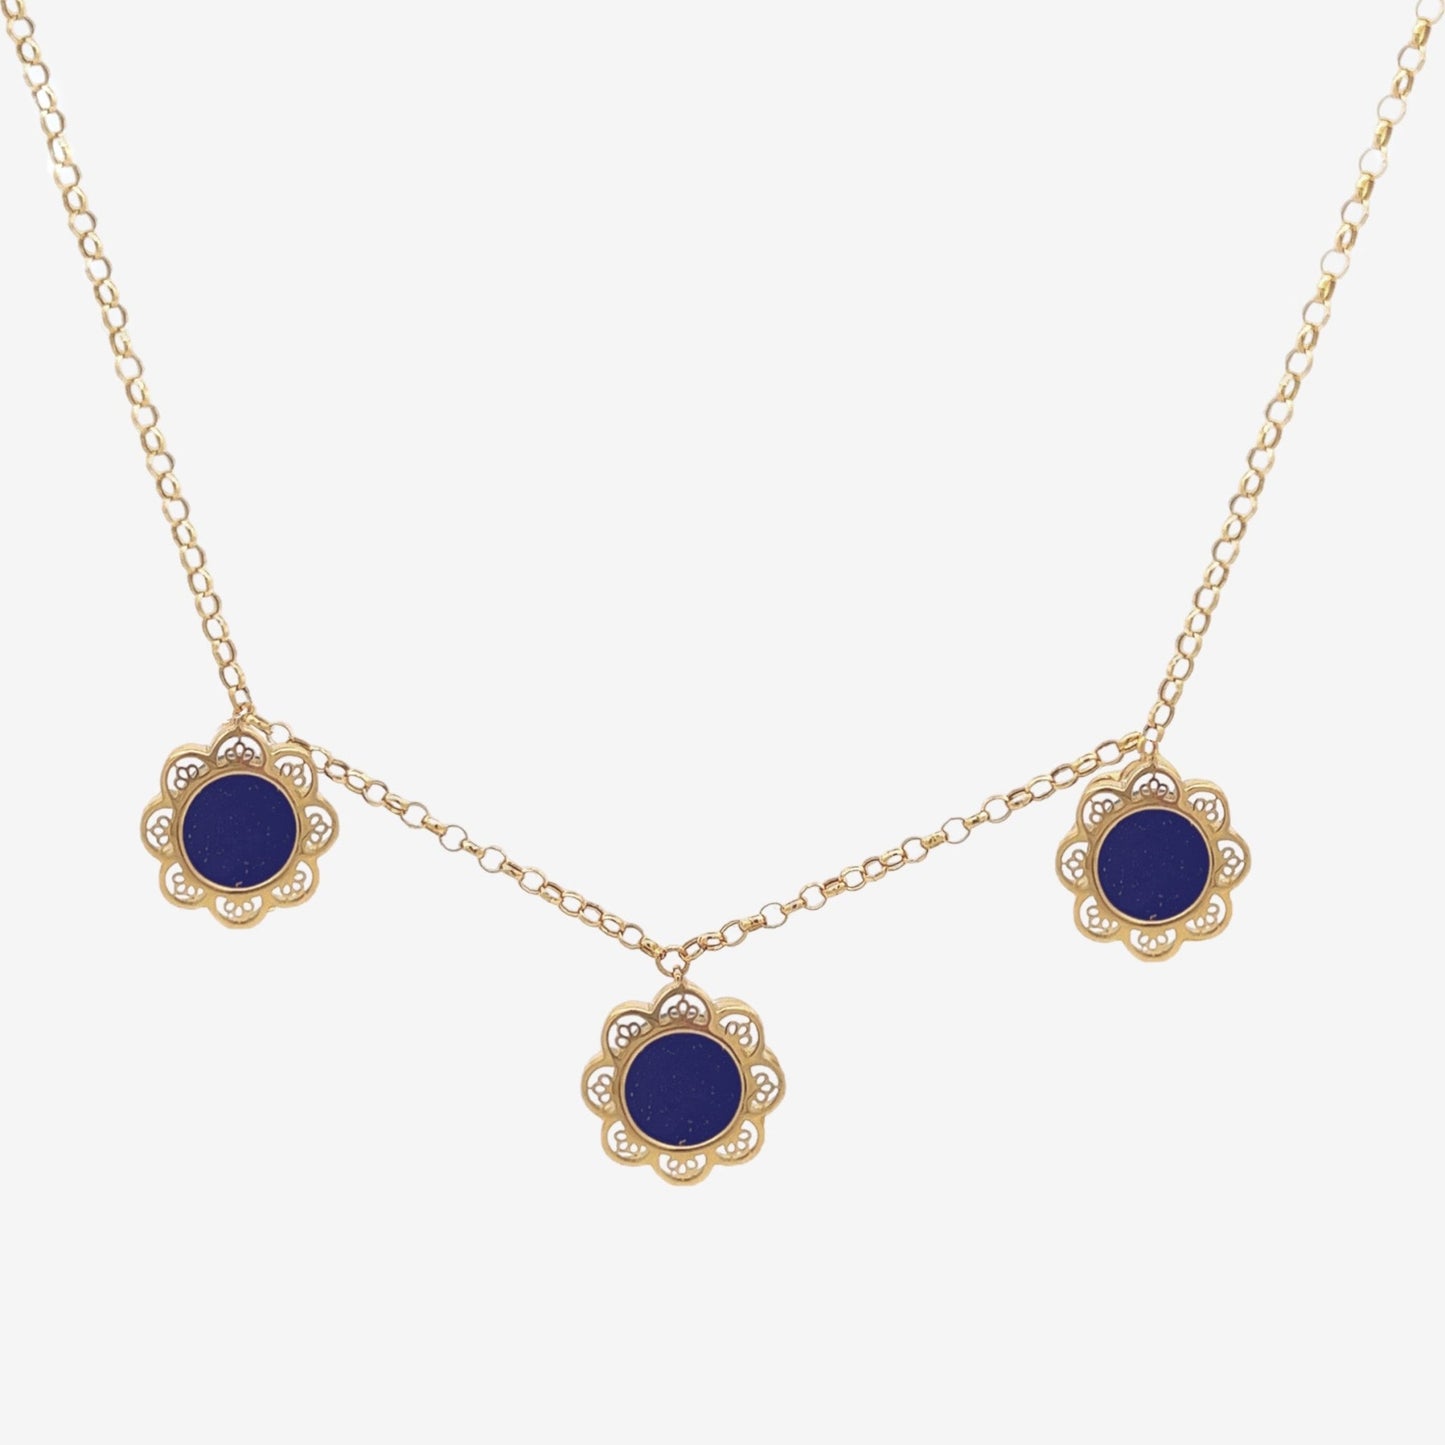 Floral necklace in Lapis Lazuli - 18k Gold - Lynor